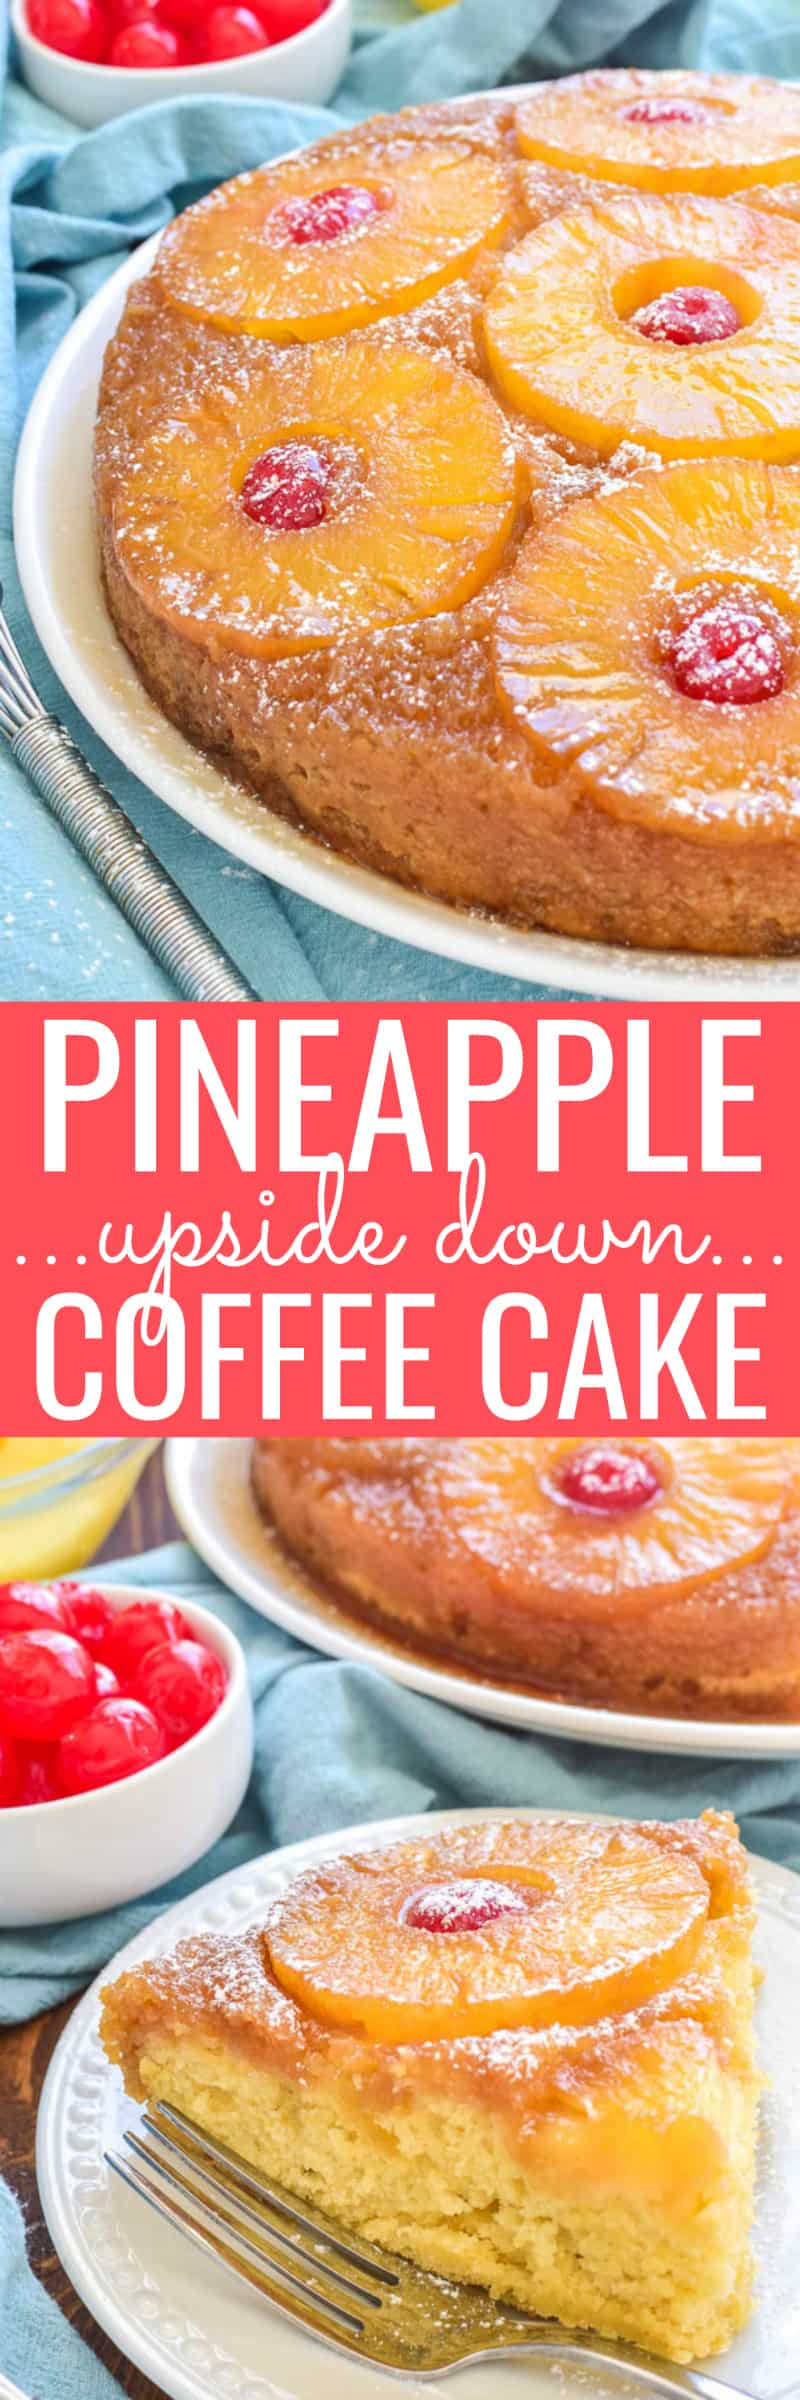 Collage image of Pineapple Upside Down Coffee Cake